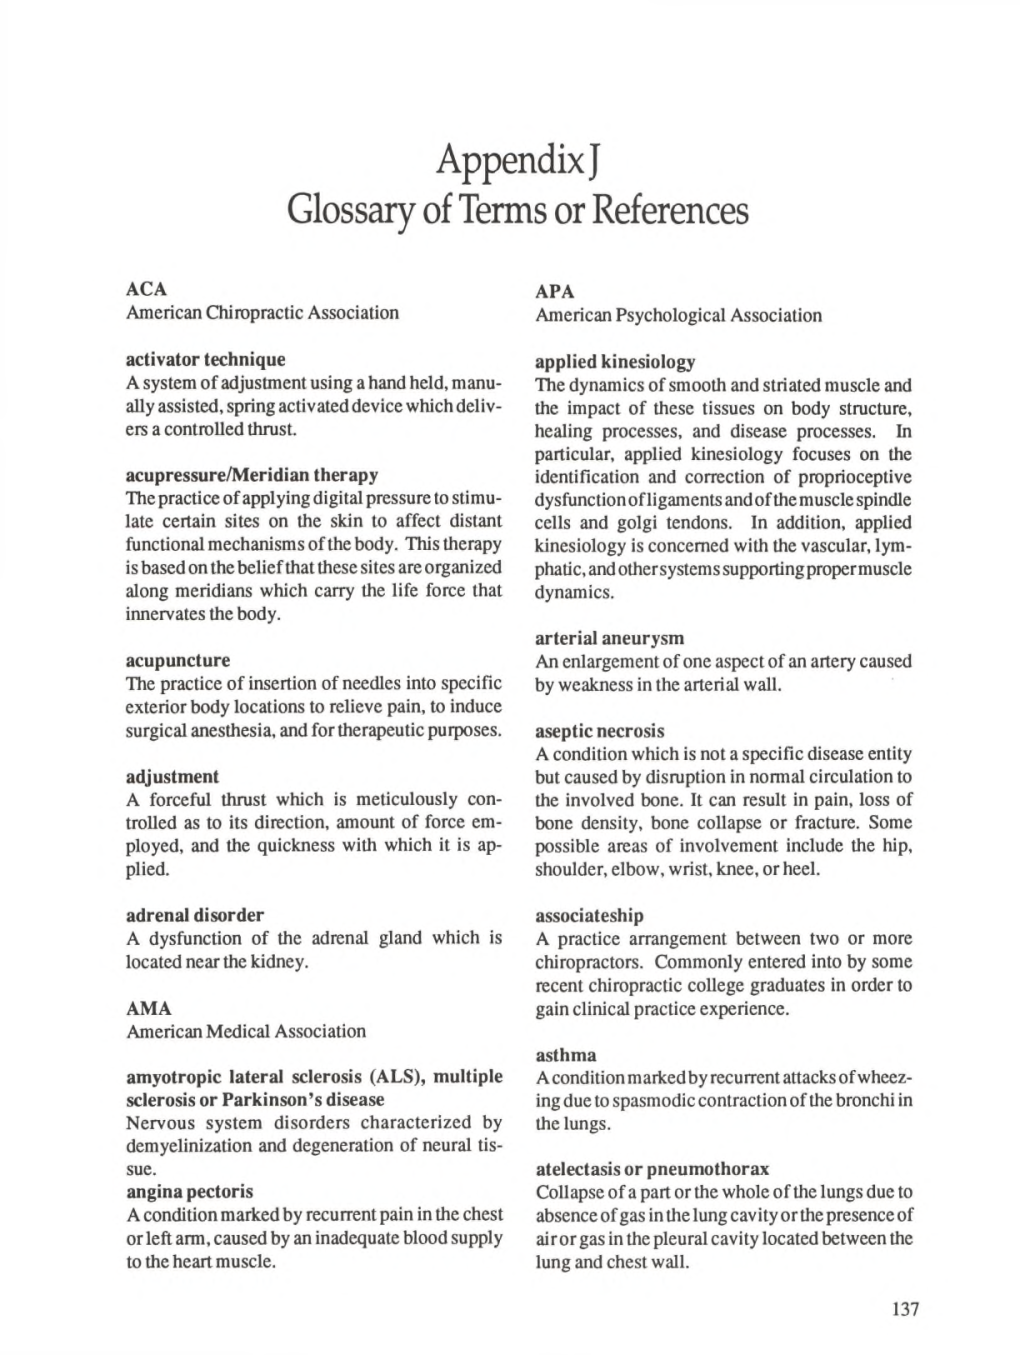 Appendix J Glossary of Terms Or References